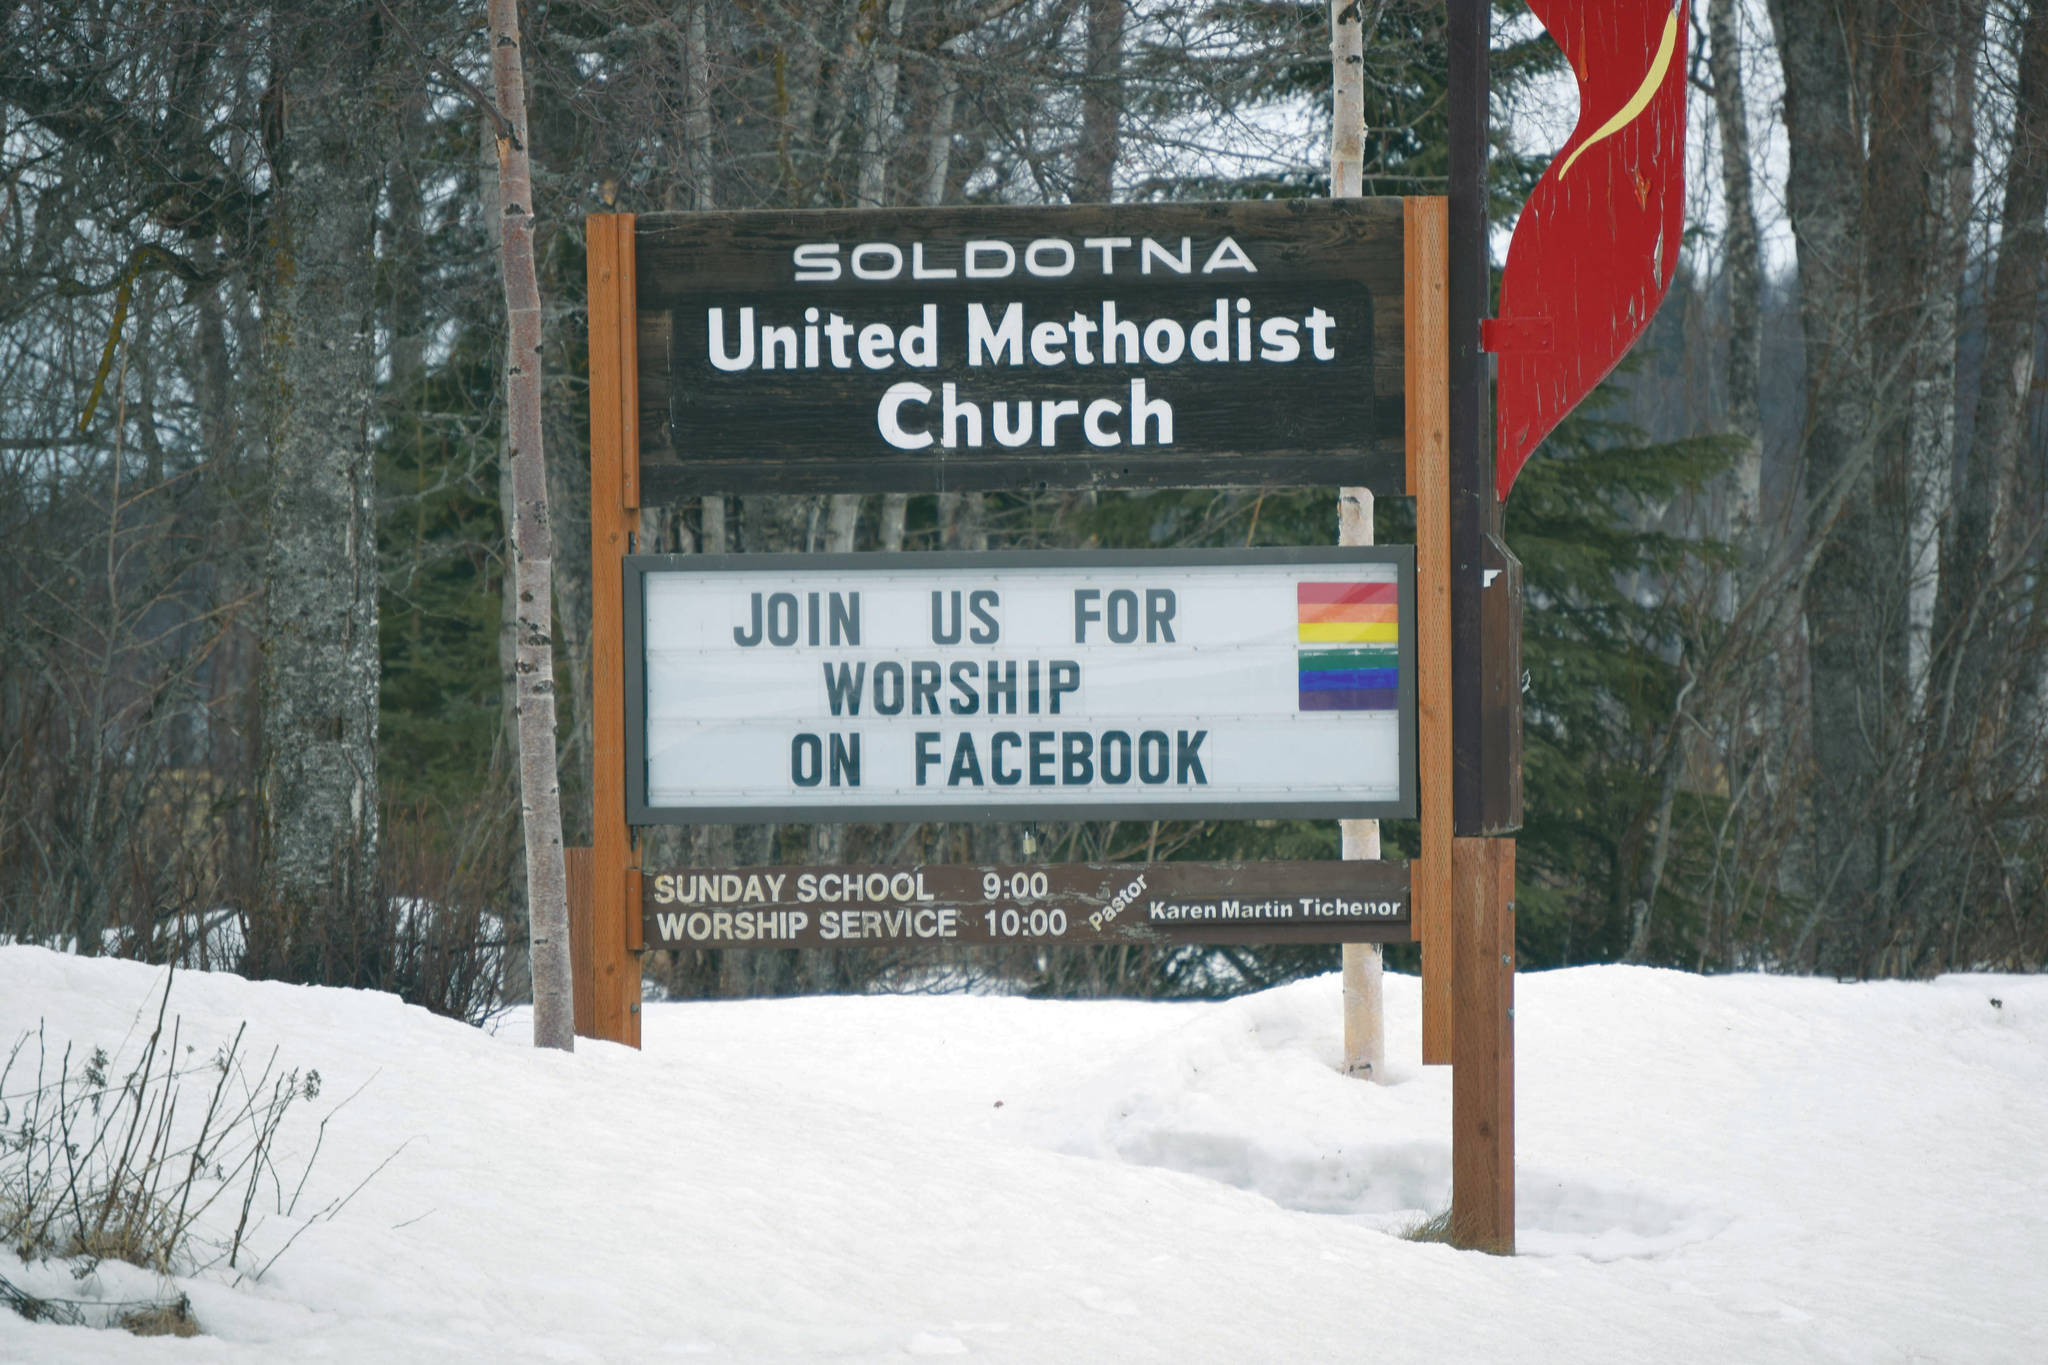 Soldotna United Methodist Church in Soldotna, Alaska, invites worshippers online with a sign seen Tuesday, April 7, 2020. (Photo by Jeff Helminiak/Peninsula Clarion)